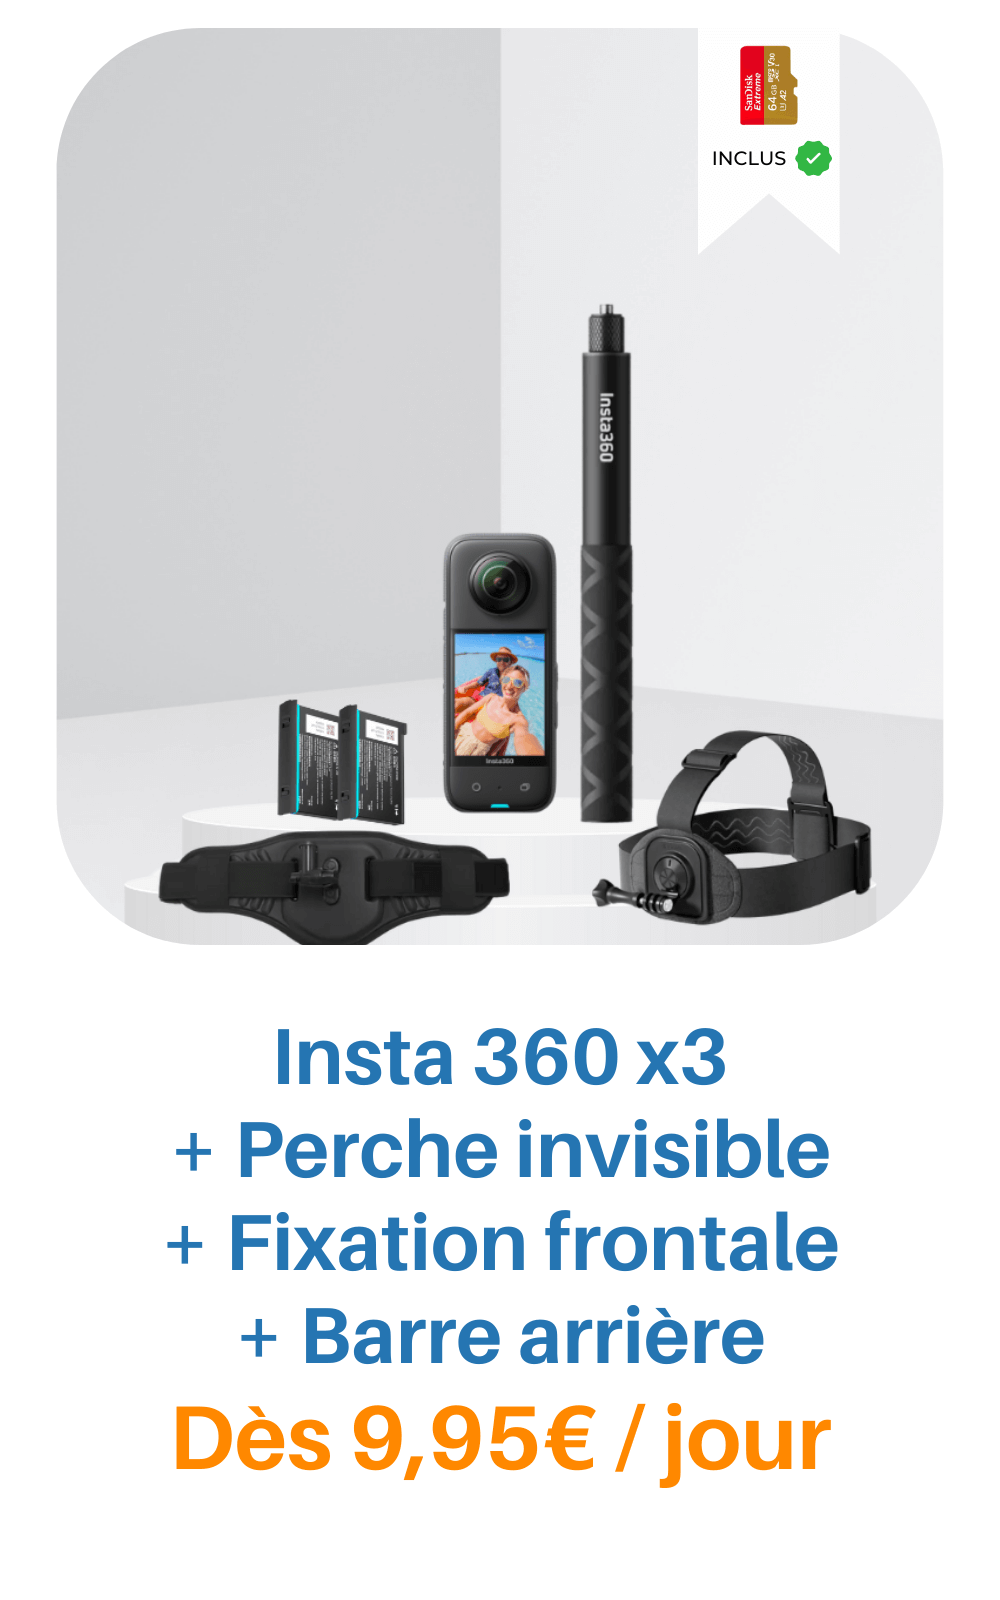 Guide d'utilisation : Insta 360 X3 - Noomady